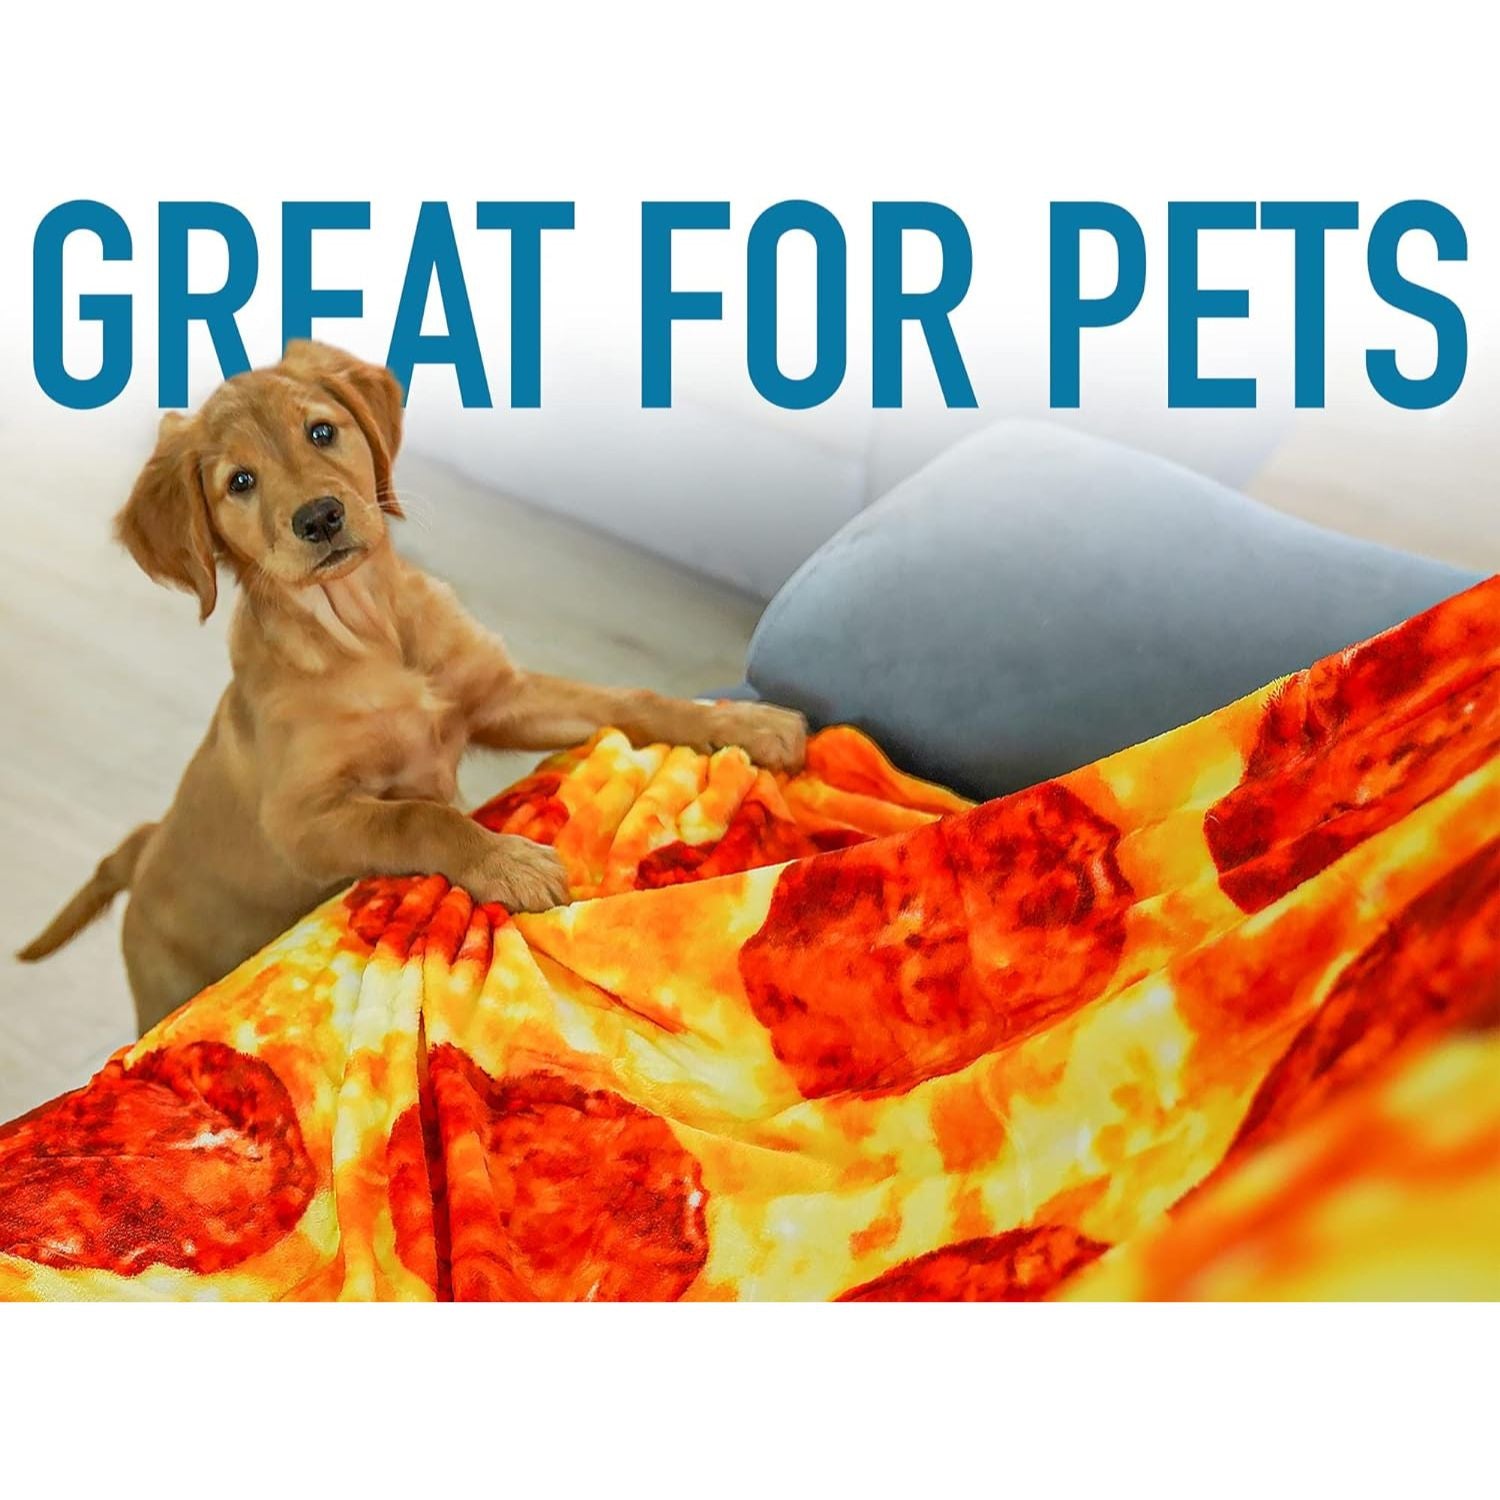 this Novelty Big Pizza Blanket is great for pets